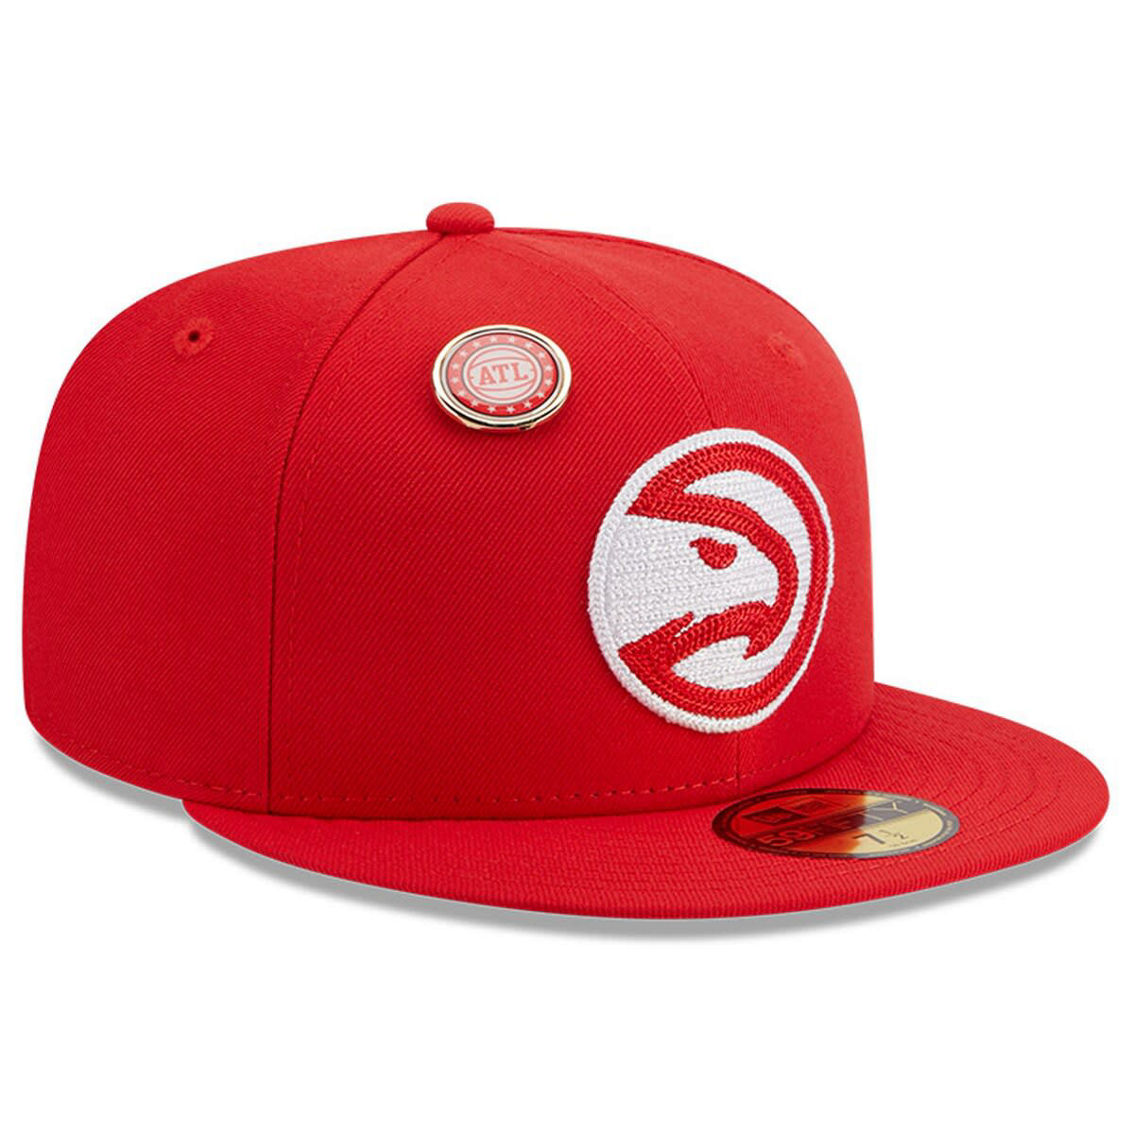 New Era Men's Red Atlanta Hawks Chainstitch Logo Pin 59FIFTY Fitted Hat - Image 4 of 4